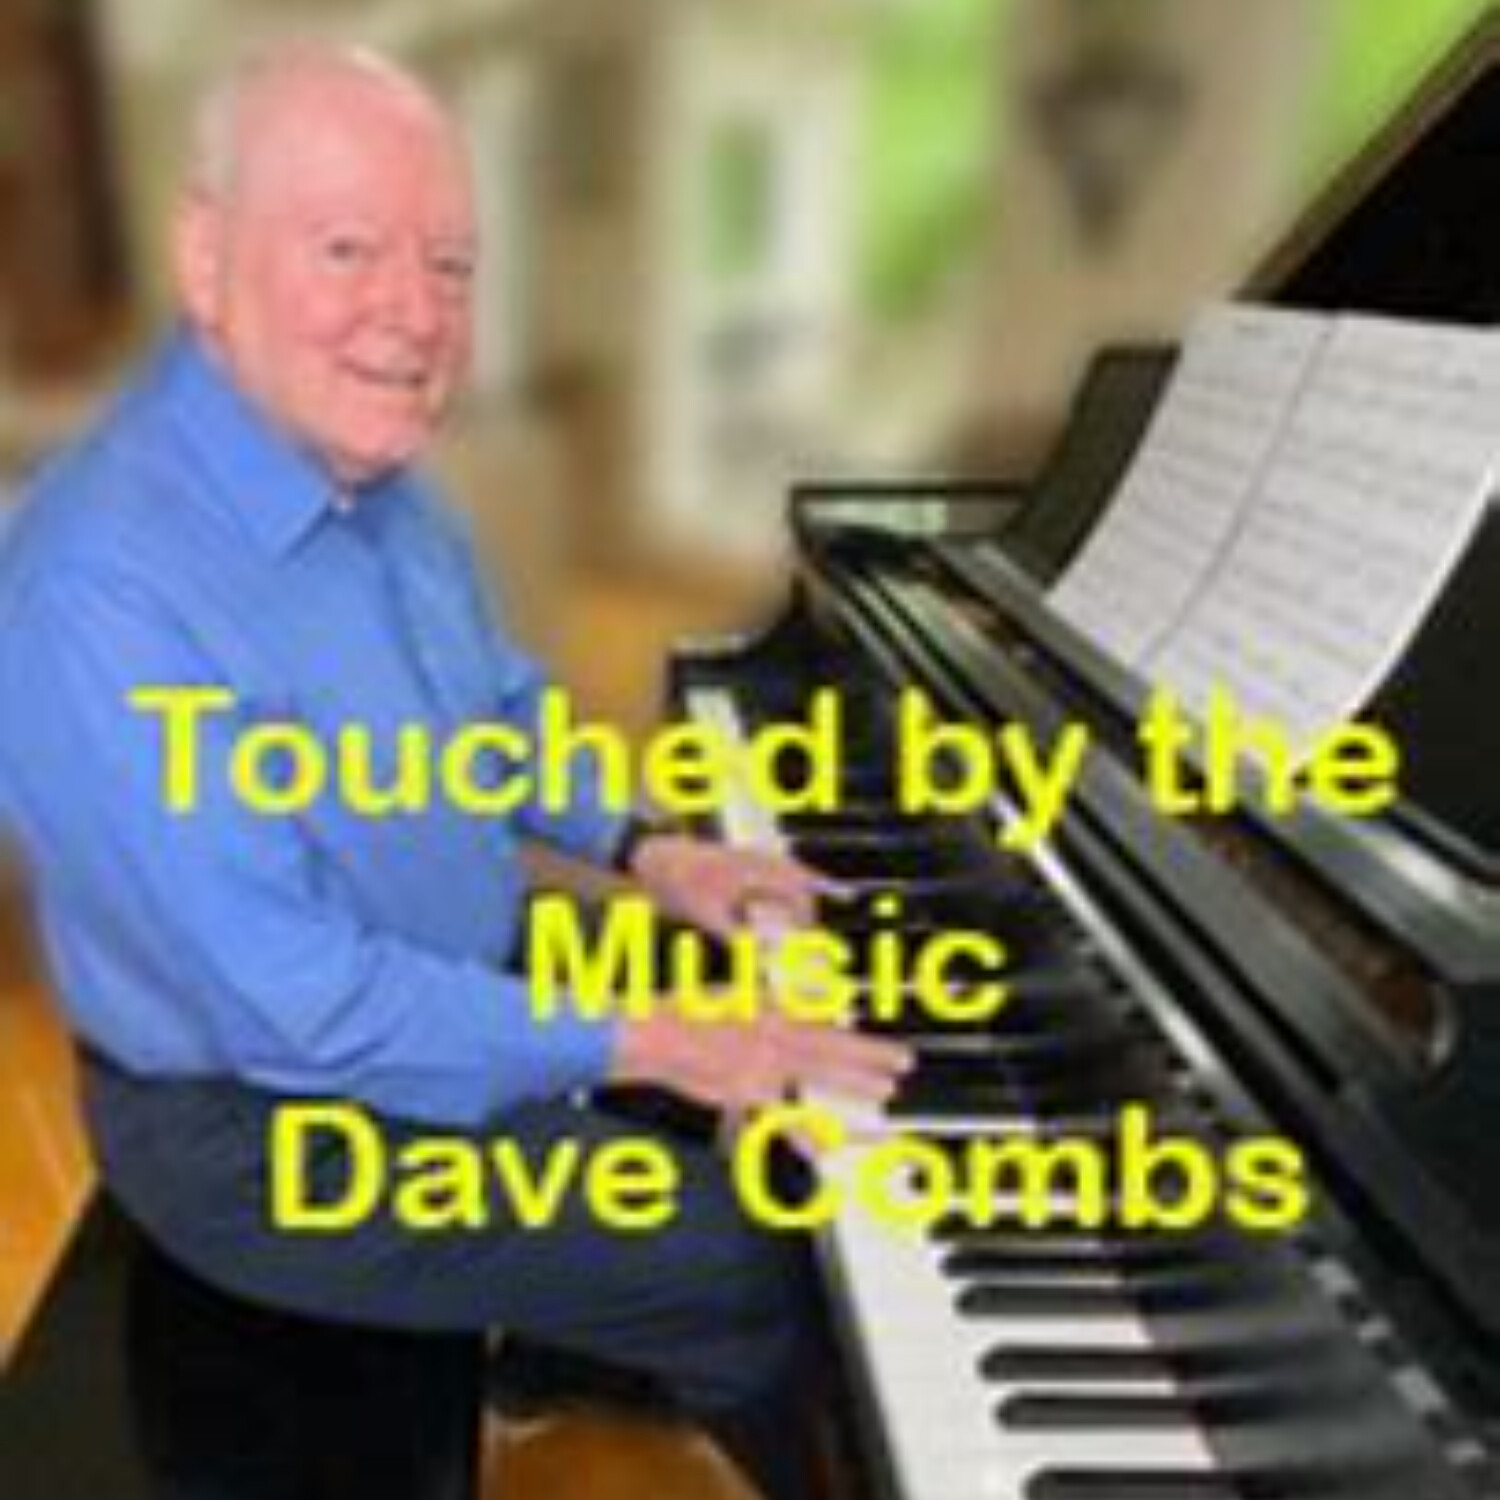 The Rachel's Song Health Marvel with Author and Pianist Dave Combs